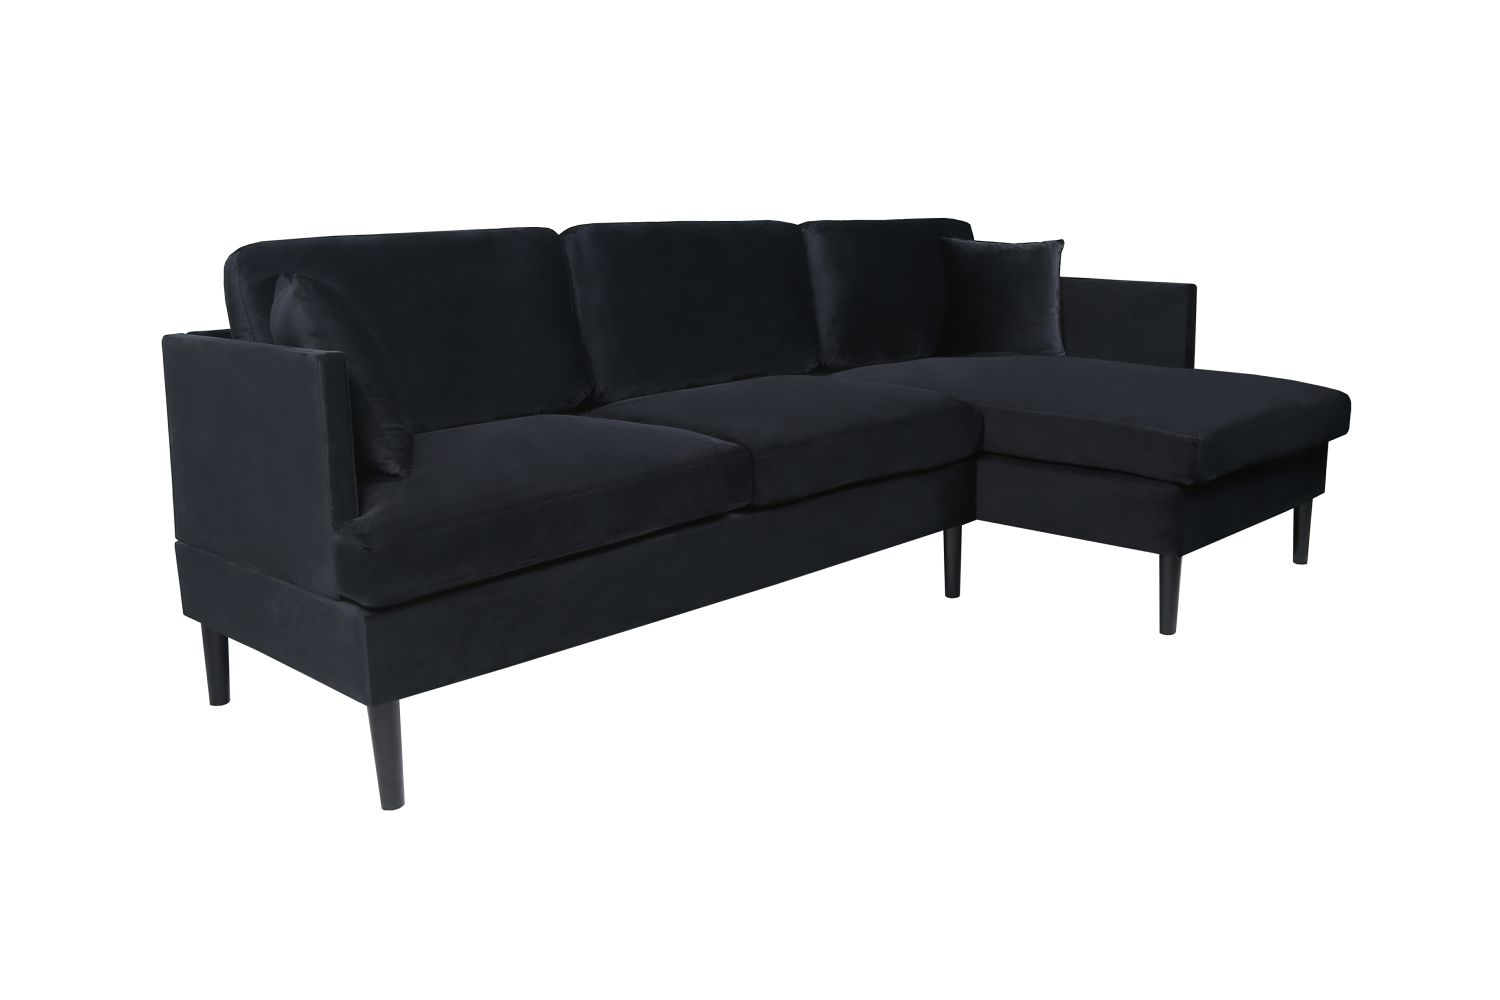 L-shape Sectional Sofa Velvet Right Hand Facing with Solid Wood Legs and Removable and Washable Seat Cover，Black - image 4 of 7